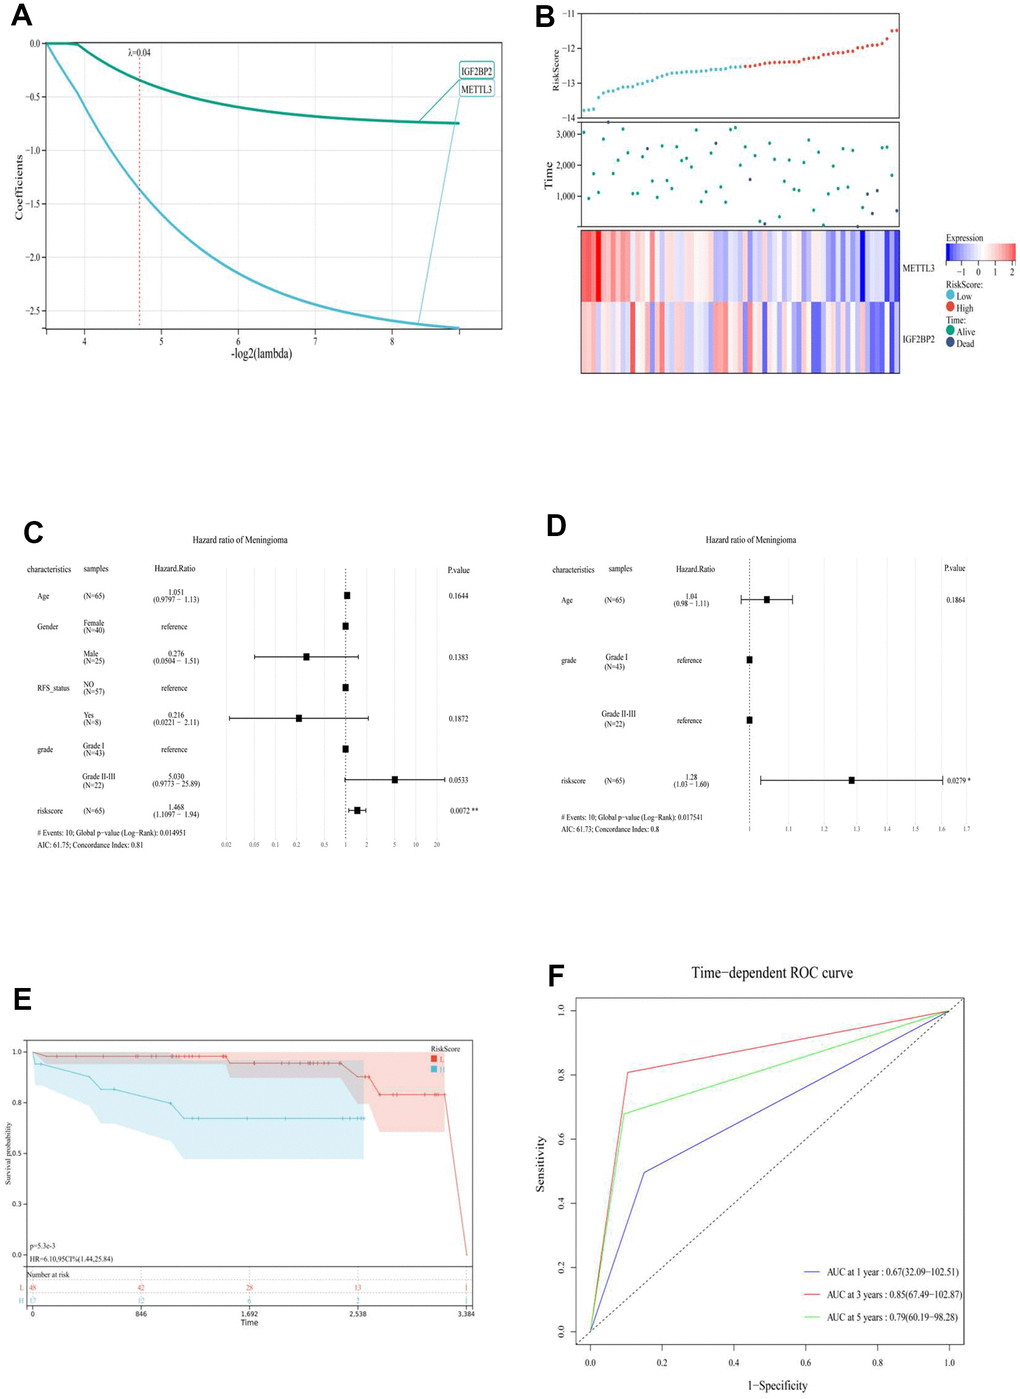 (A) LASSO Regression was applied to constructed prognostic prediction model of the m6A regulator. (B) RiskScore, survival time and status of each patient (GSE16581), and the expression of two m6A regulatory genes (IGFBP2 and METTL3). (top) RiskScore of each meningioma patient. Blue represents low risk and red represents high risk. (Middle) The survival time and status of each patient with meningioma. (Bottom) The heat map showed the expression of two m6A regulatory genes (IGFBP2 and METTL3) in each patient with meningioma. Blue to red indicated the expression of m6A regulatory genes from low to high expression. Univariate (C) and multivariate (D) Cox regression analysis to develop the risk scores in meningioma. (E) Kaplan-Meier curve analysis of high-risk group and low risk group. (F) ROC curve showing the supporting the performance of prognostic prediction model. ROC, receiver operating characteristic; L, low risk score group. H, high risk score group.